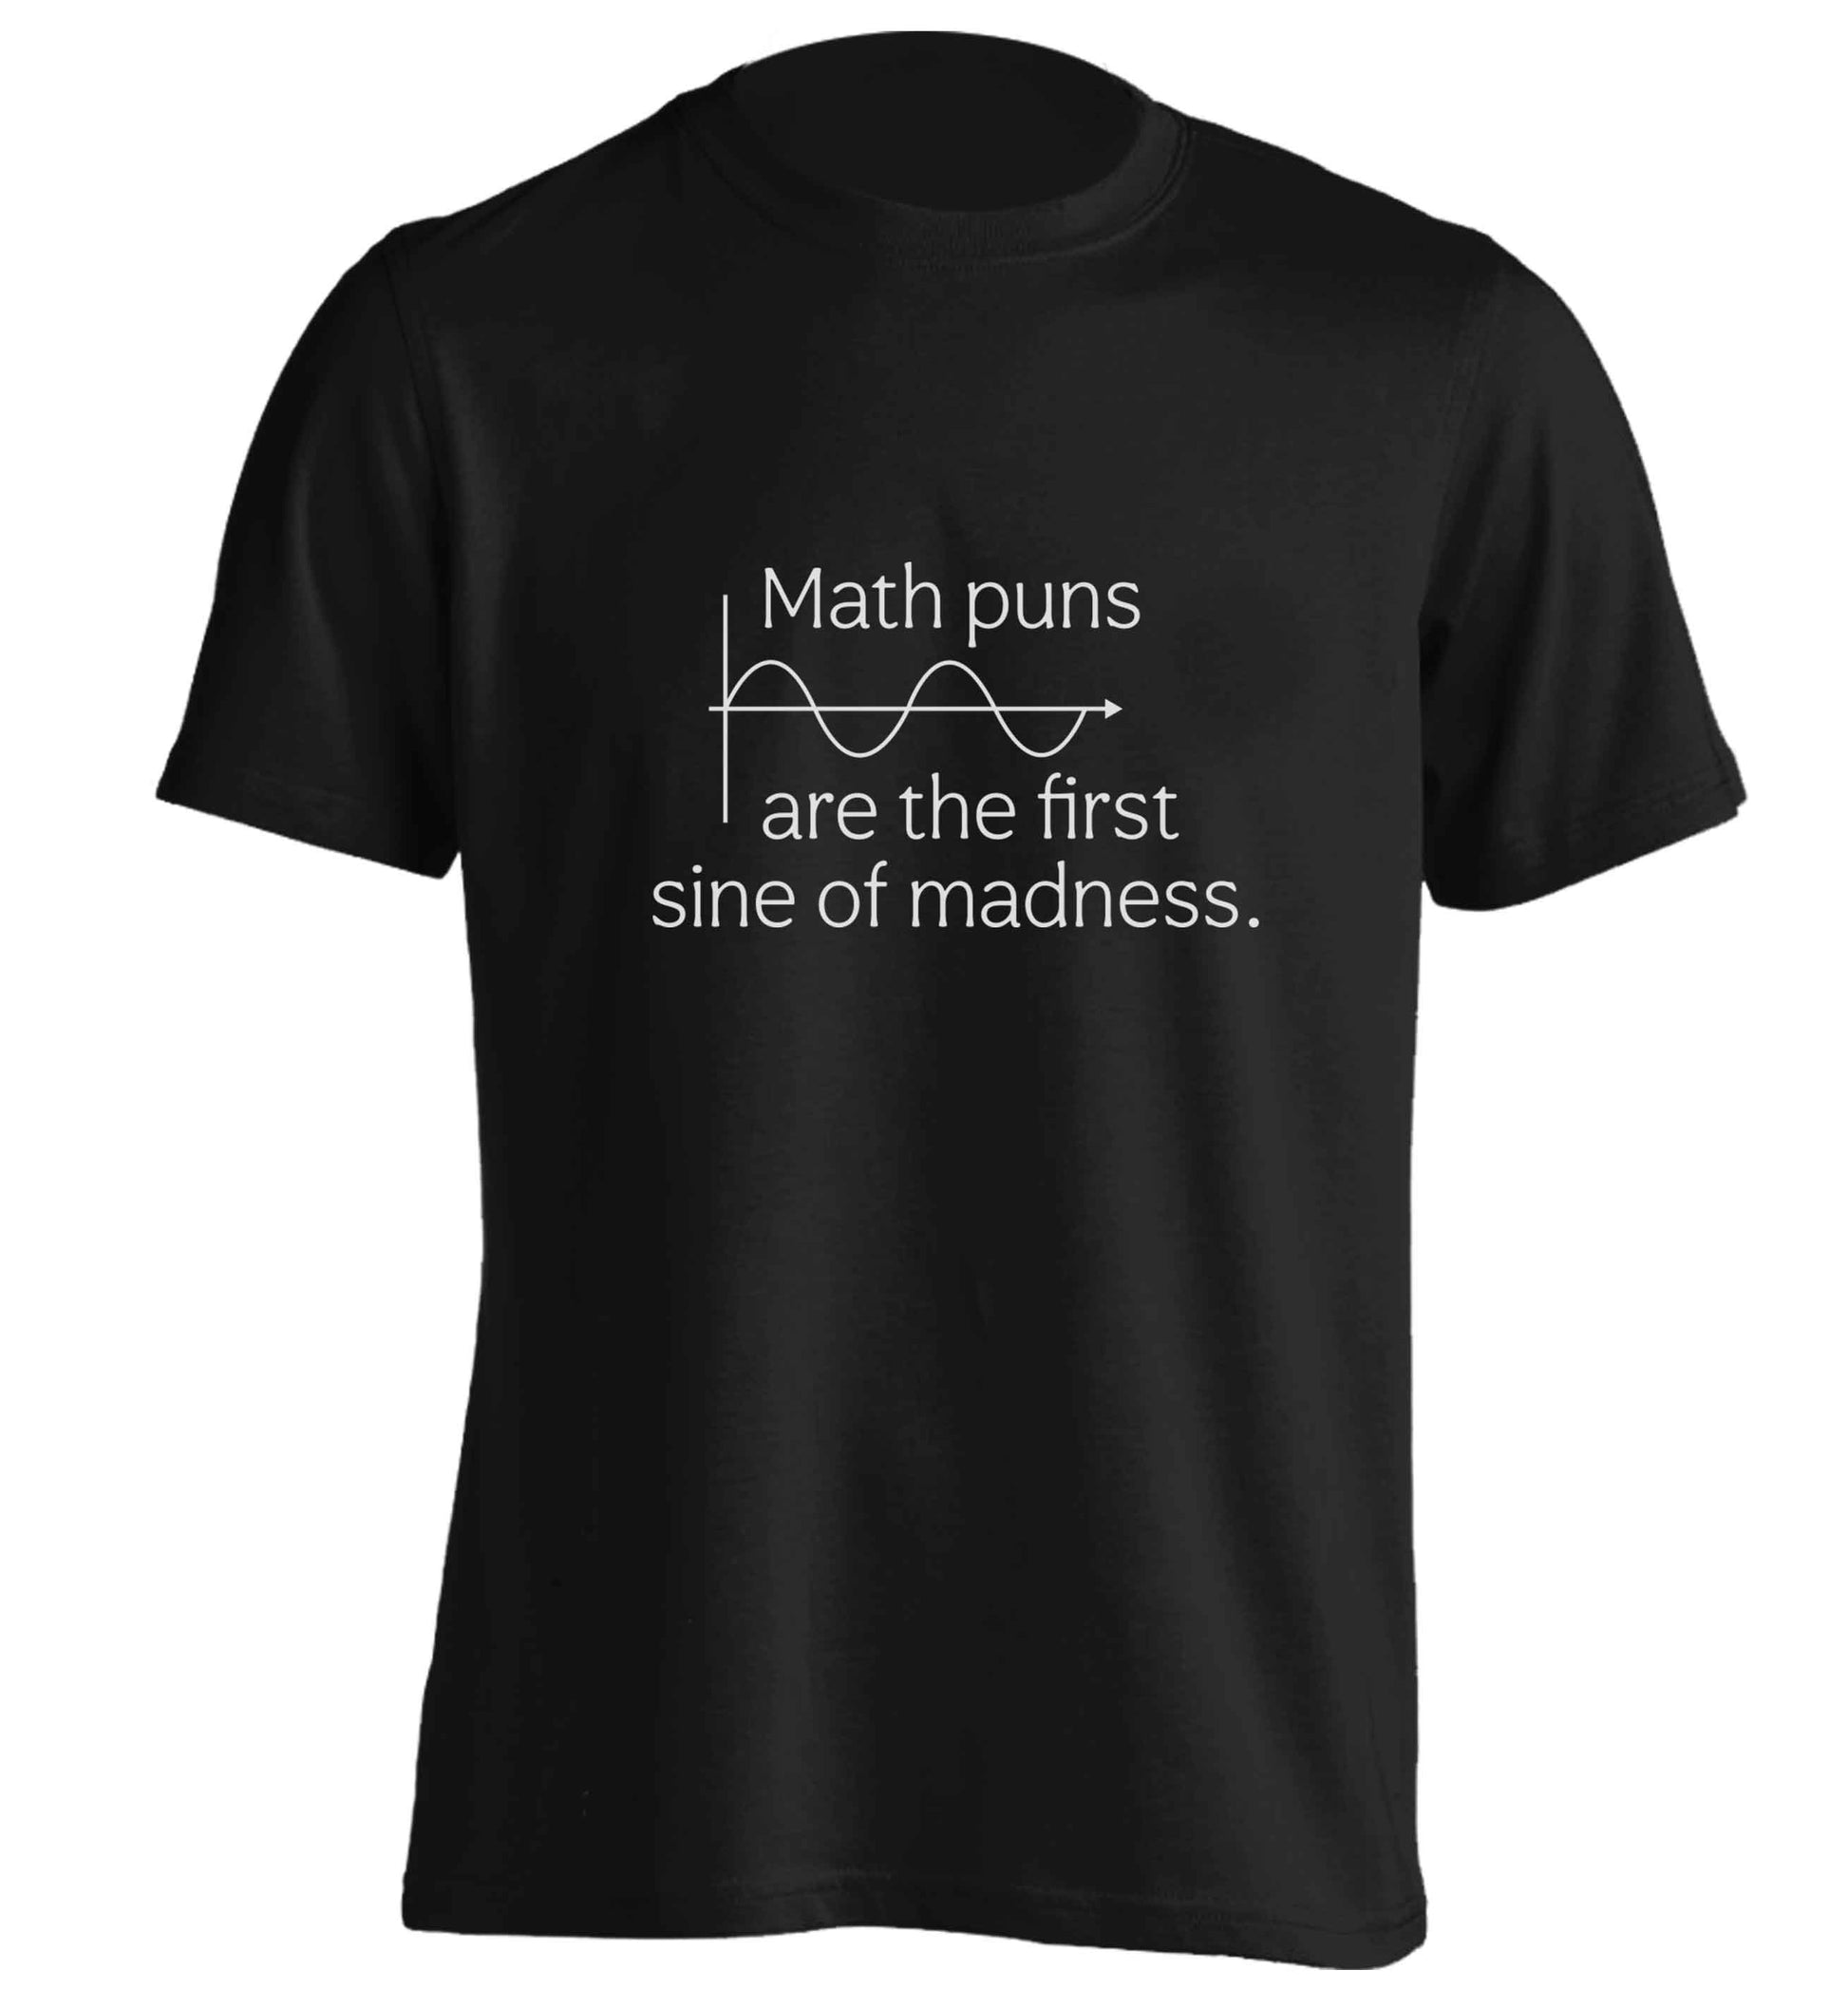 Math puns are the first sine of madness adults unisex black Tshirt 2XL